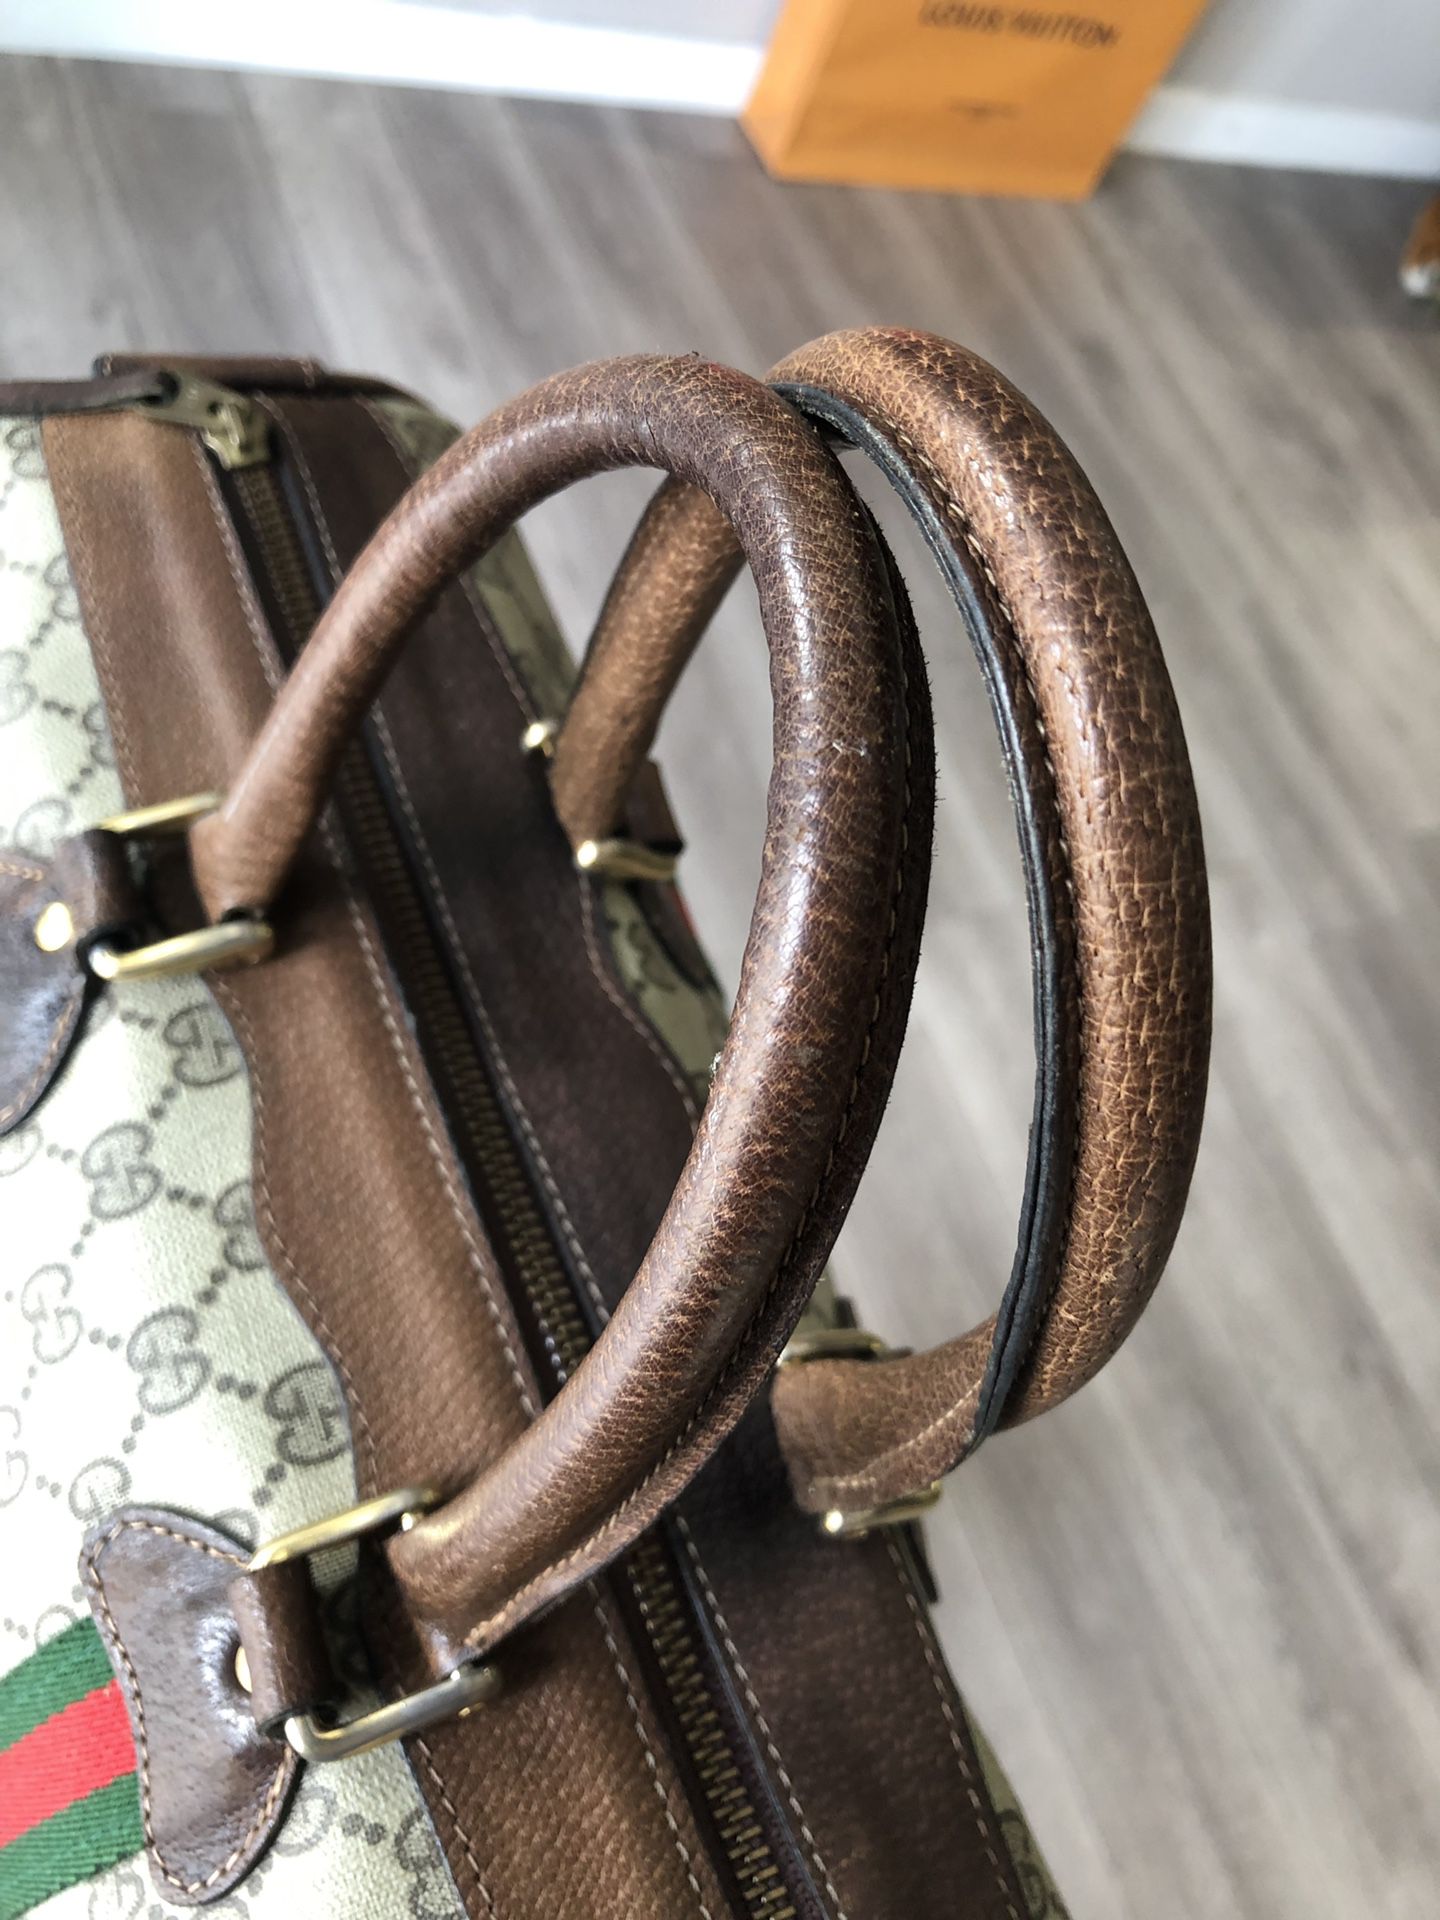 Authentic Vintage Gucci Boston Bag! for Sale in Burbank, CA - OfferUp